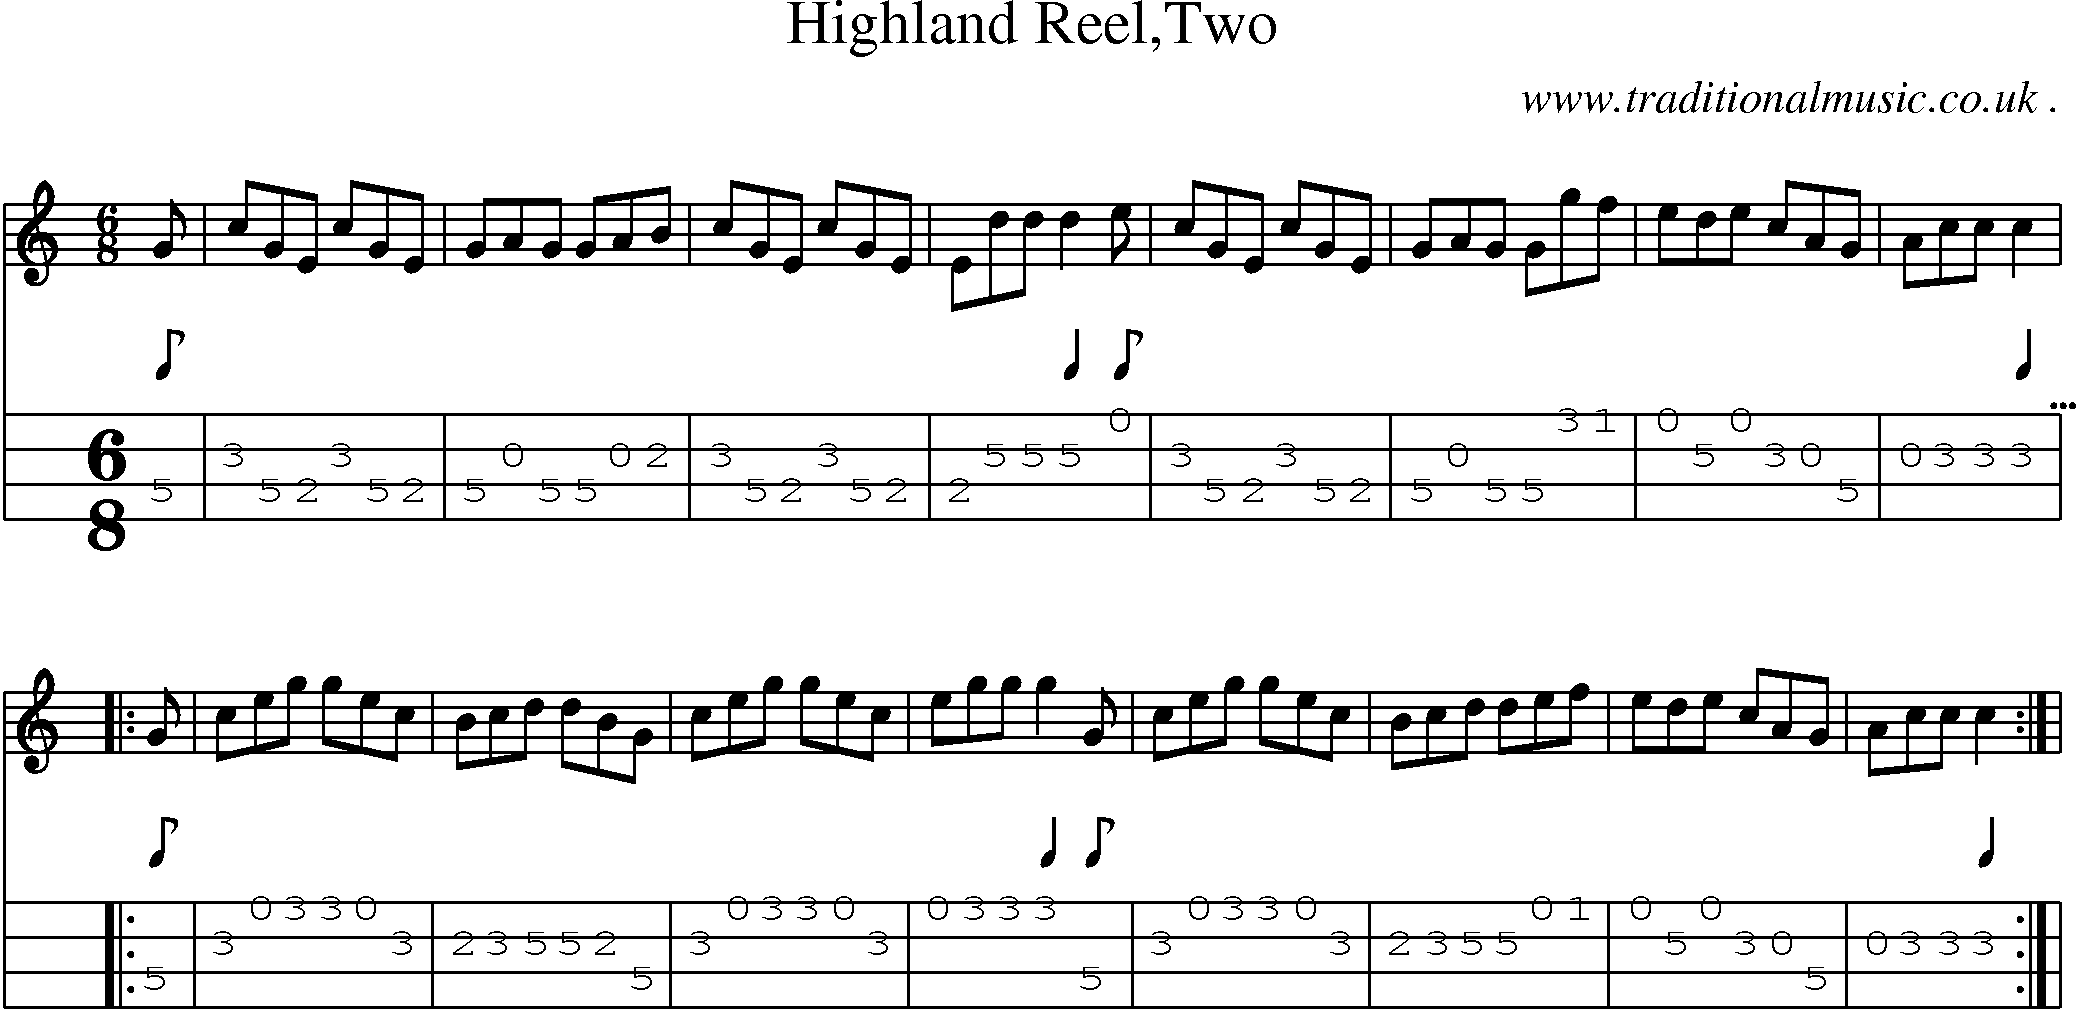 Sheet-Music and Mandolin Tabs for Highland Reeltwo